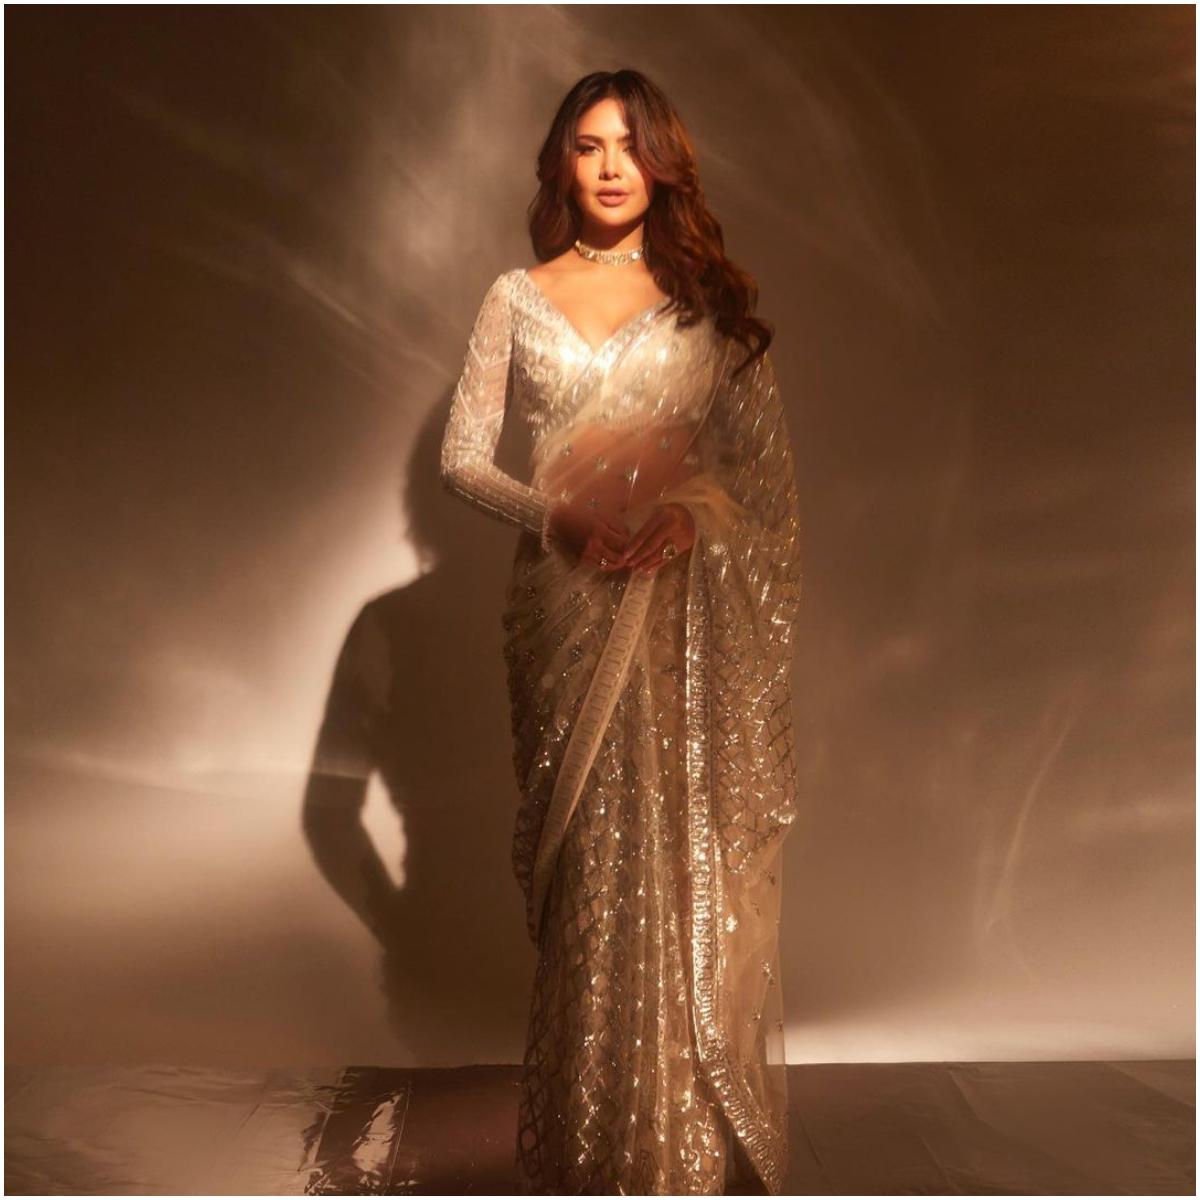 Serving another ethnic look, Esha opts for the quintessential saree this time. This shimmery number is perfect for festive season or attending a wedding